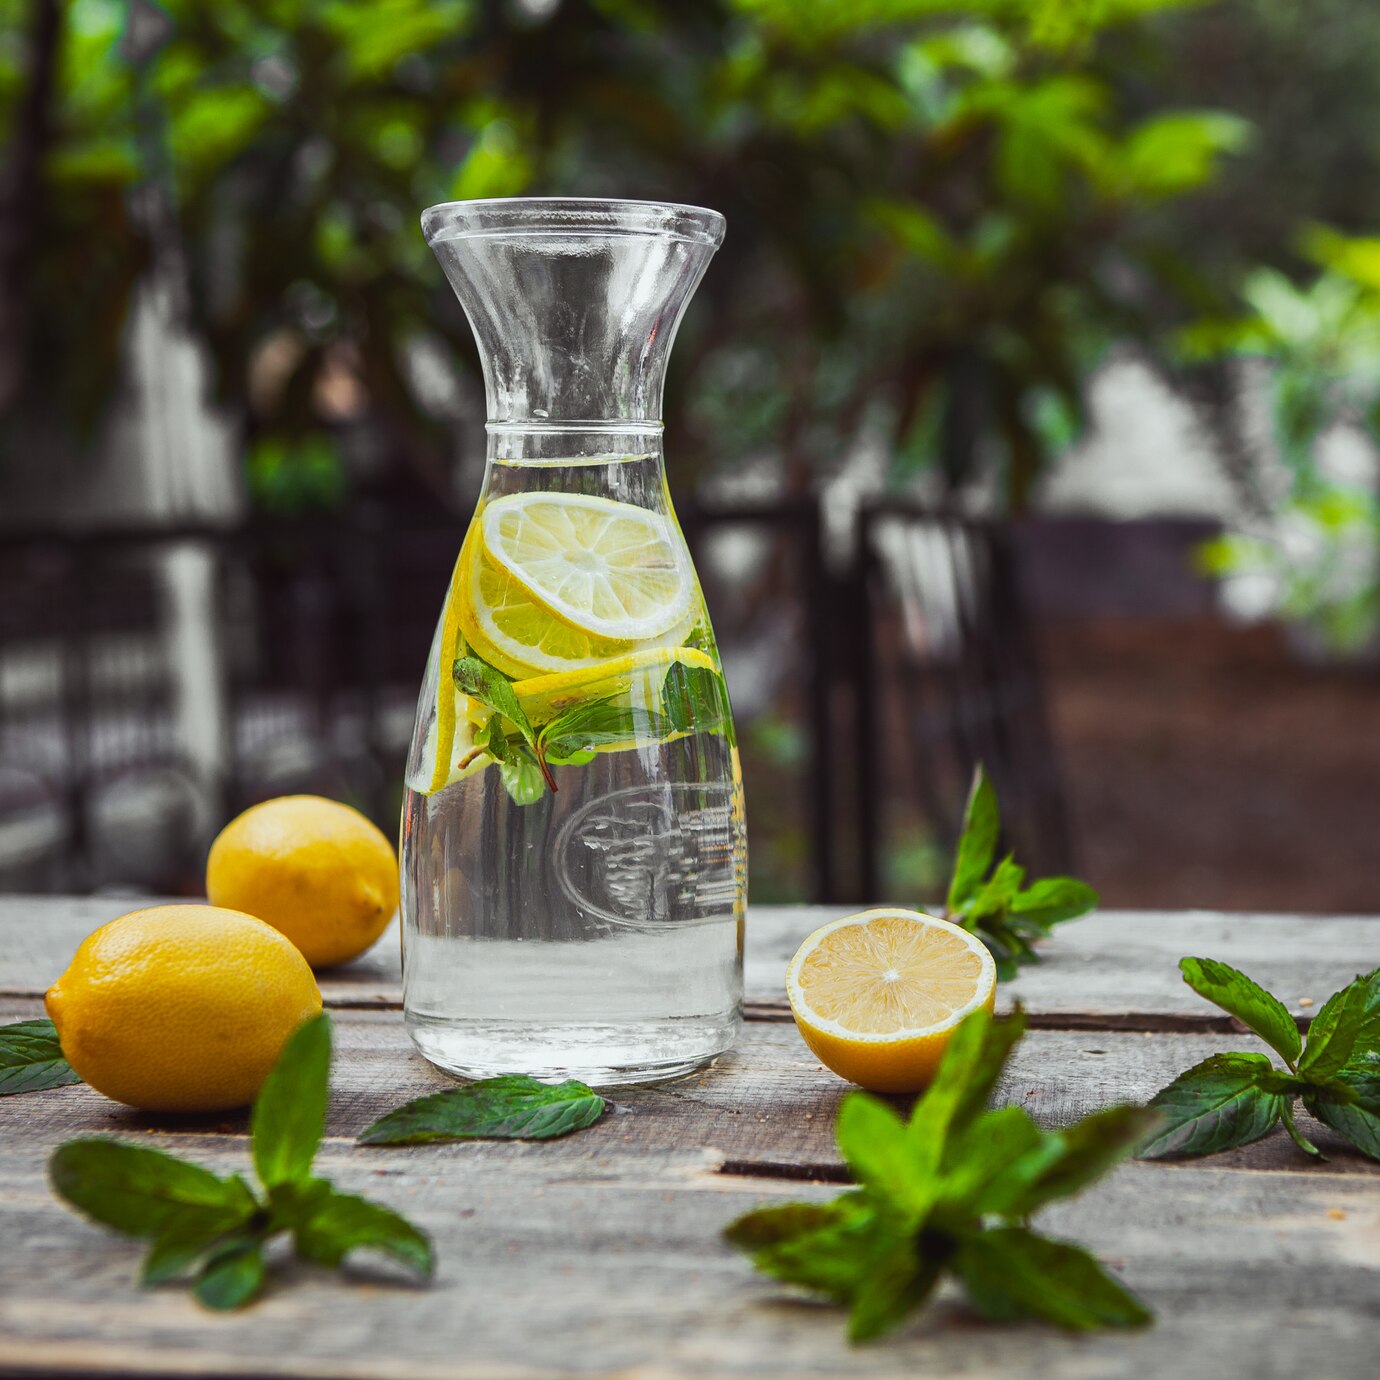 lemonade-and-ingredients-in-a-glass-jug-on-wooden-and-garden-table-side-view_176474-5969 (1).jpg